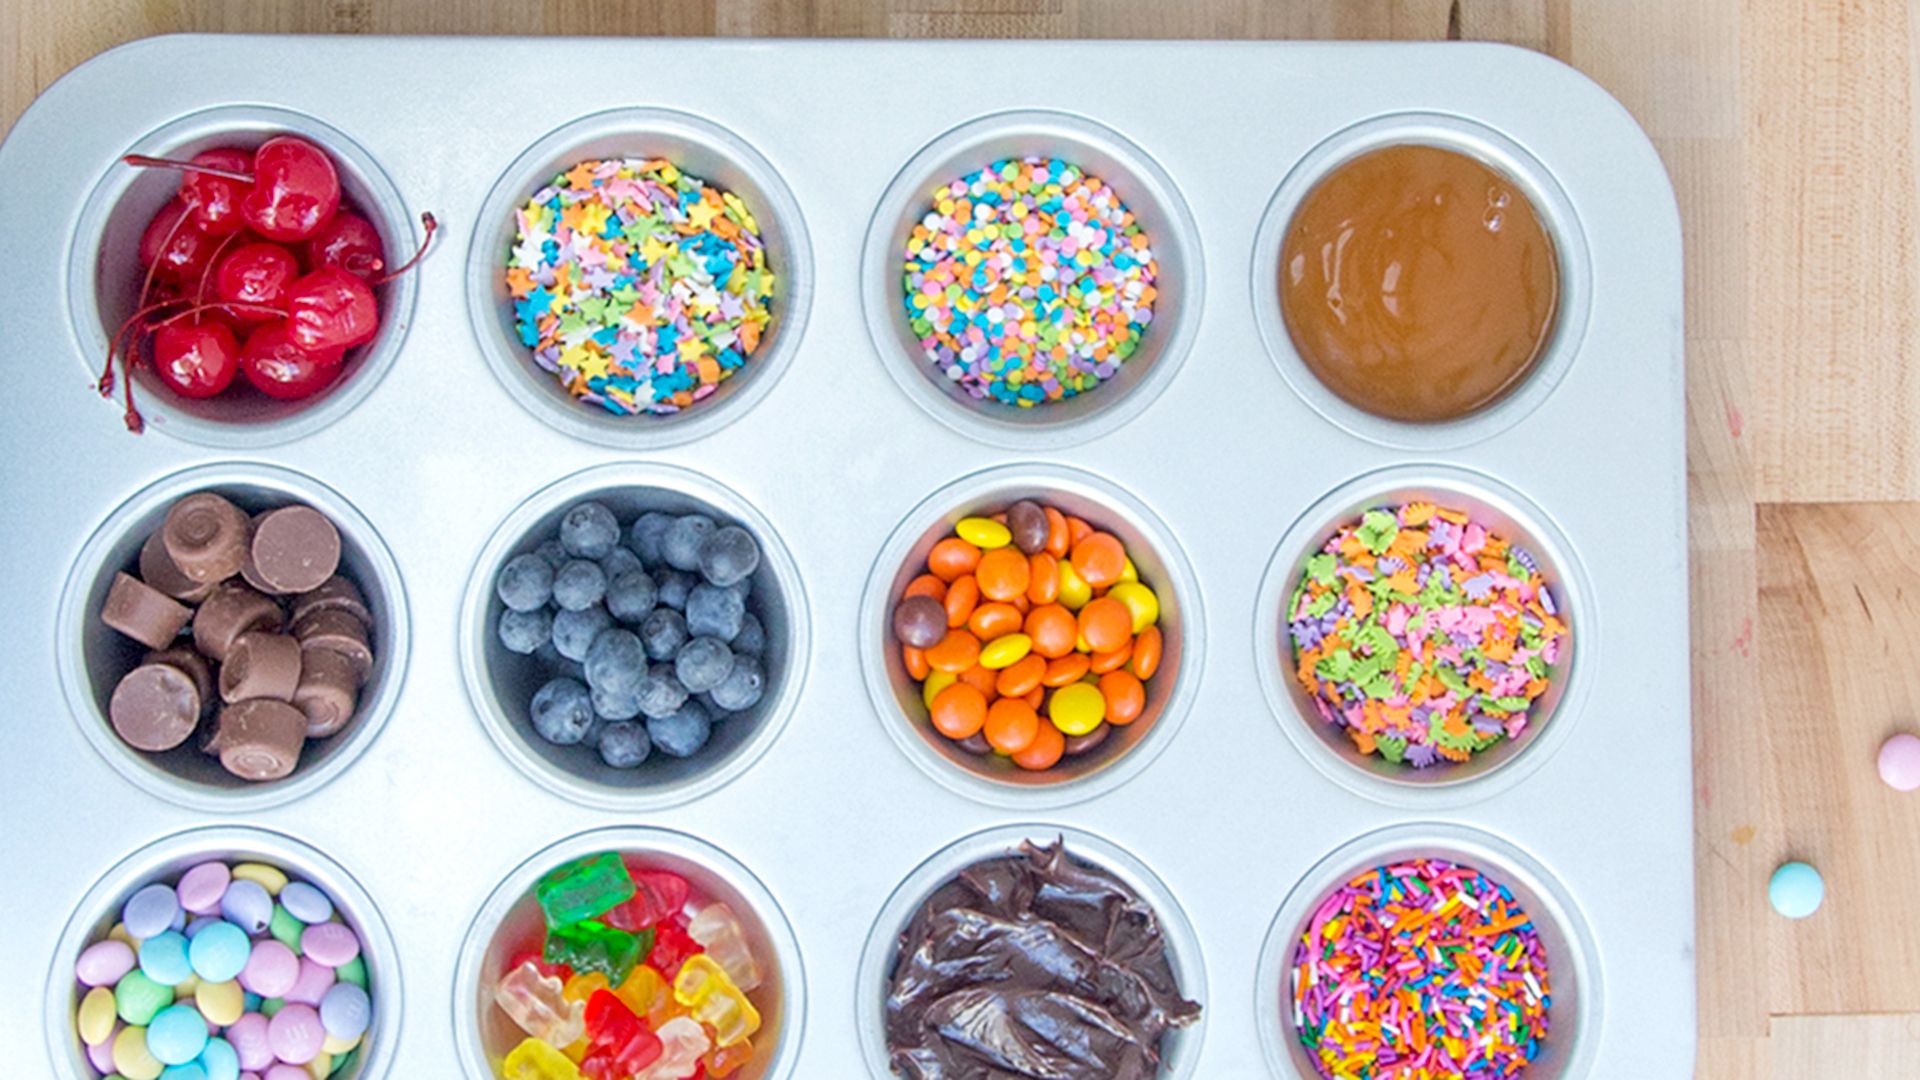 How to throw a party with an ice cream bar and keep toppings organized